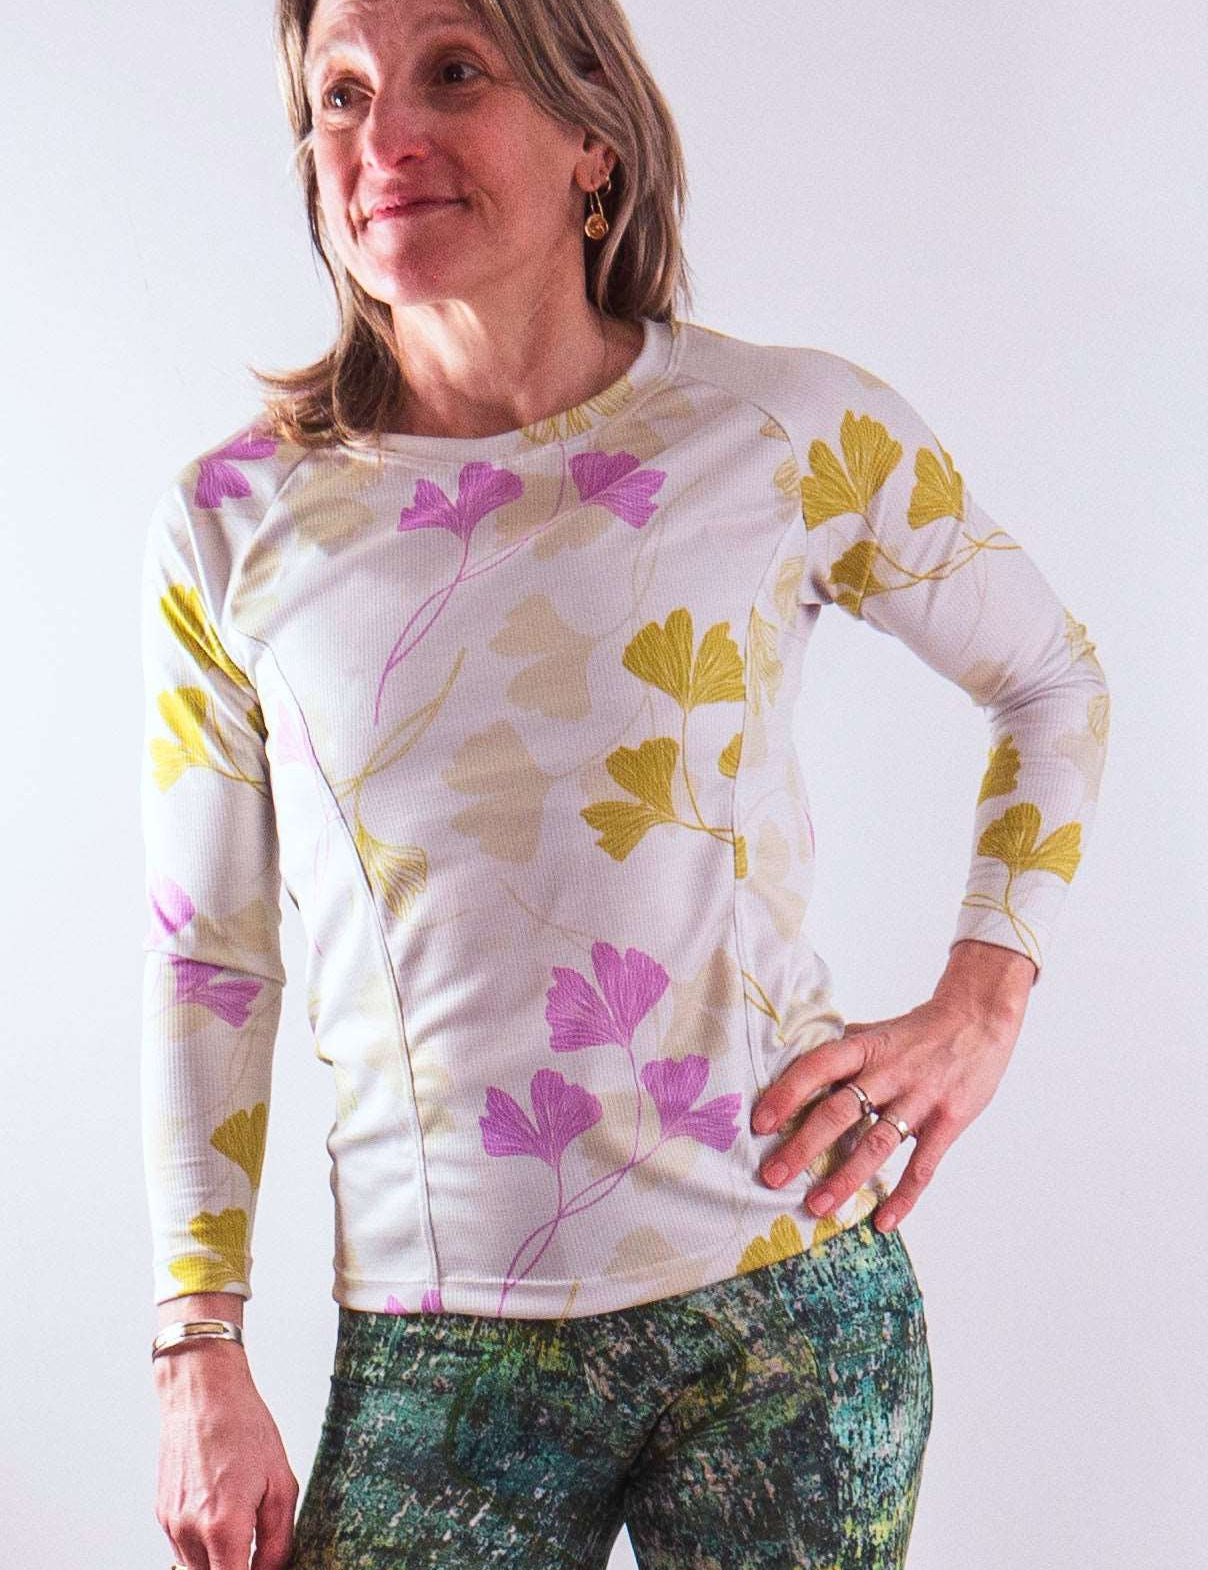 Moxie Tee Jersey Moss Floral long sleeve